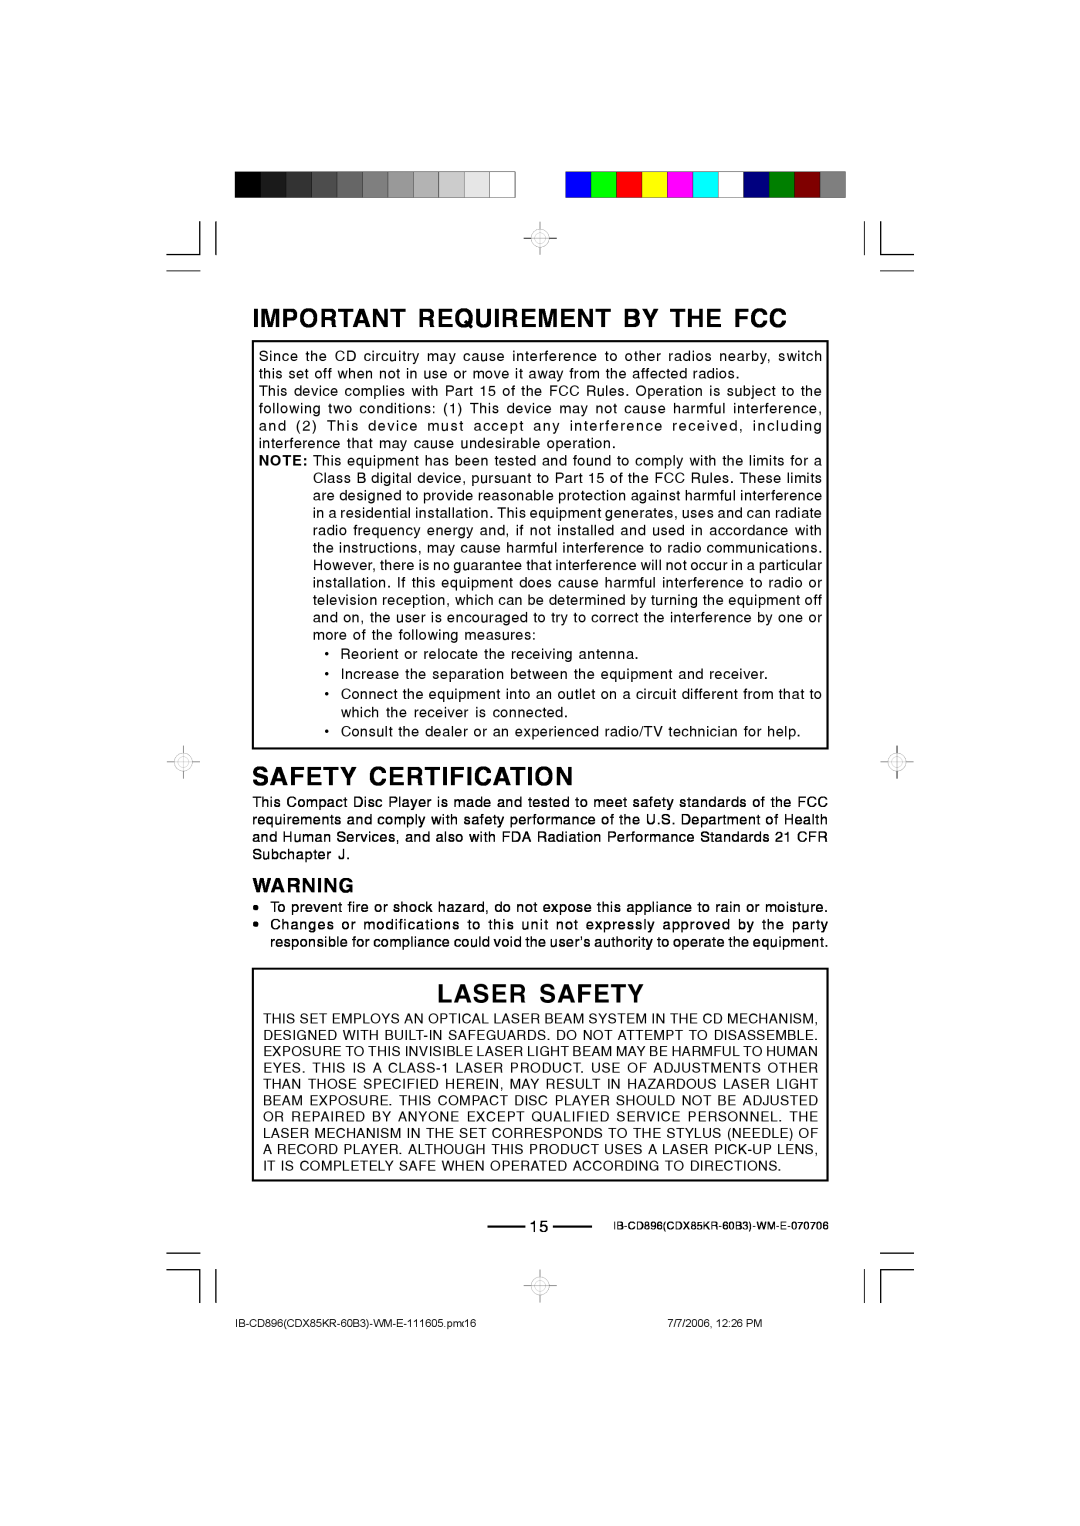 Lenoxx Electronics CD-896 operating instructions Important Requirement By The Fcc, Safety Certification, Laser Safety 